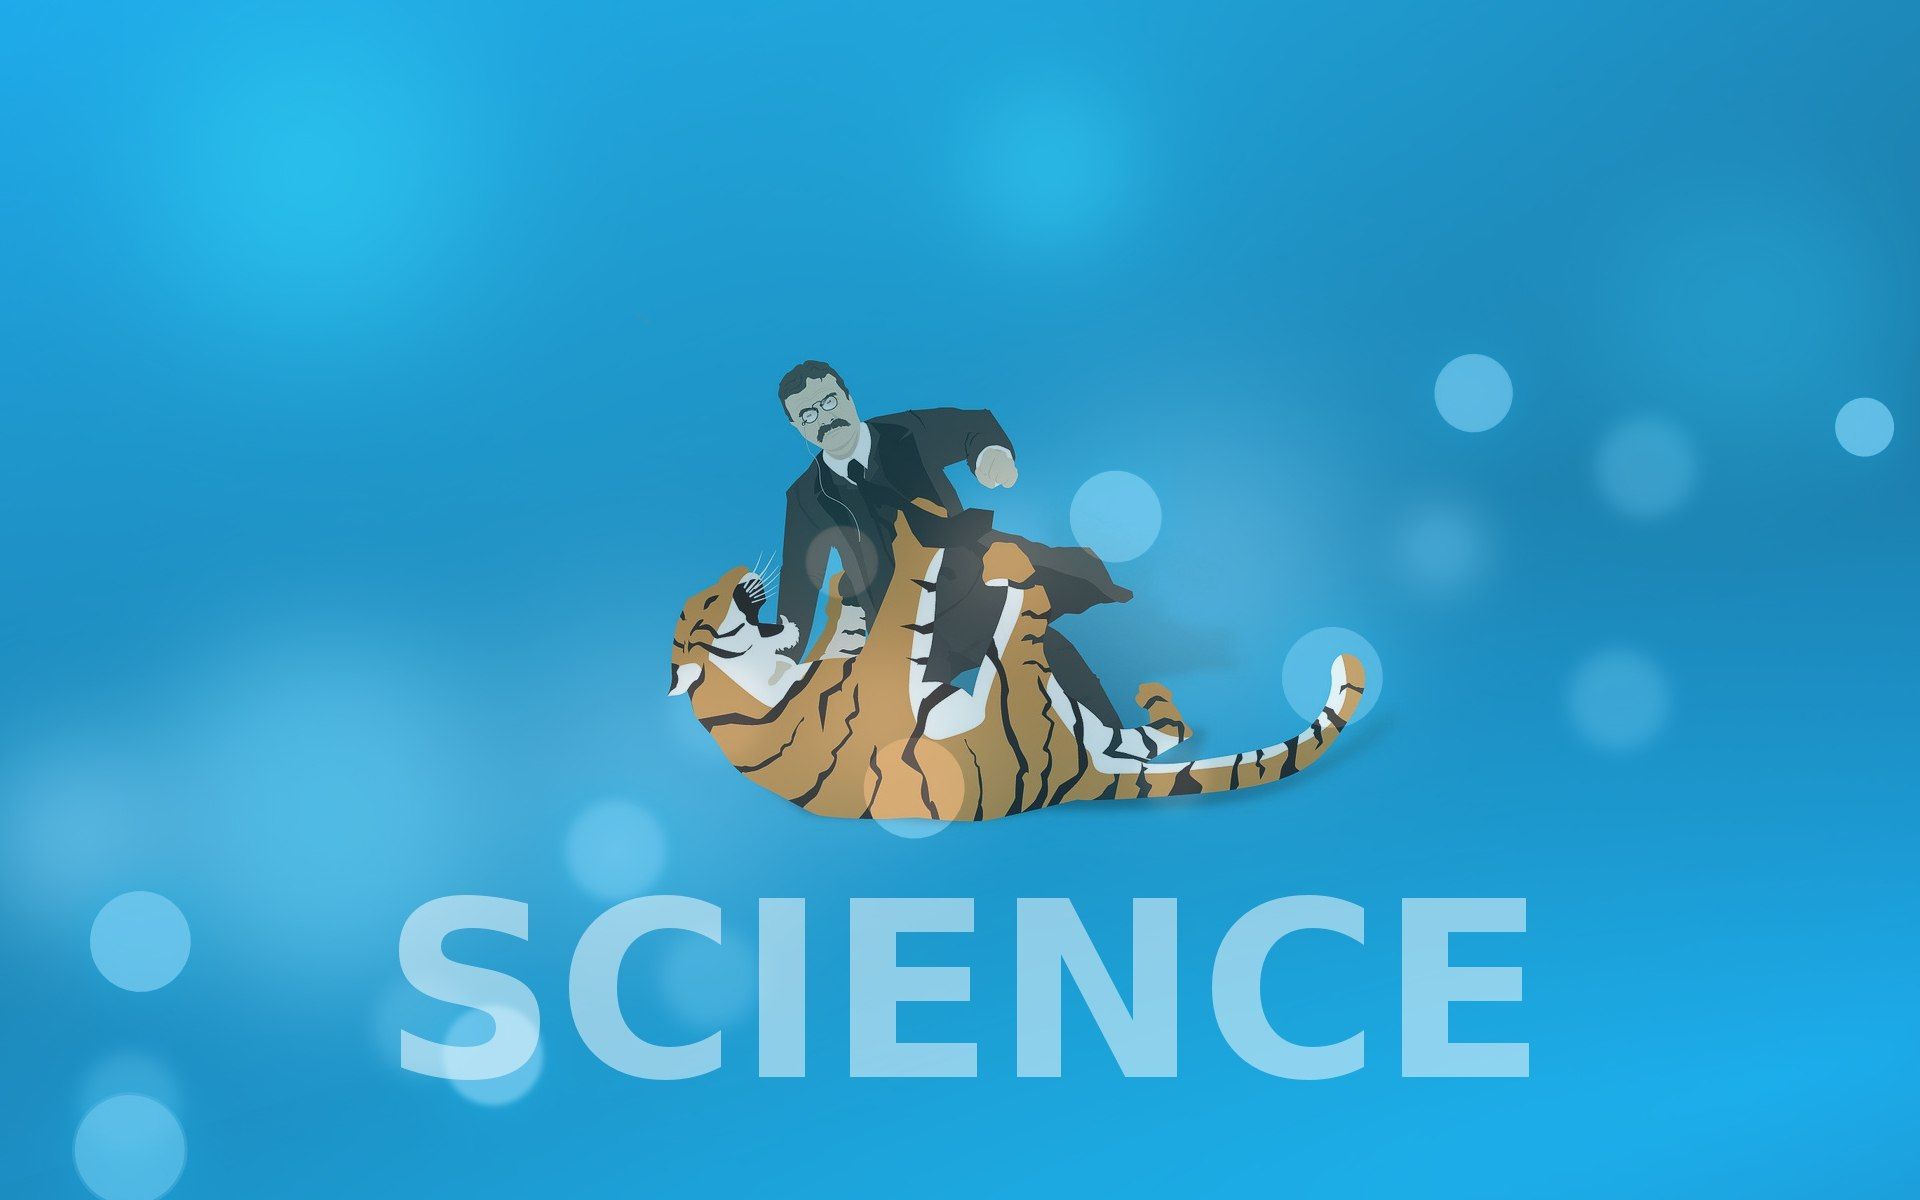 Science wallpaper 1920x1200 - (#32369) - High Quality and ...